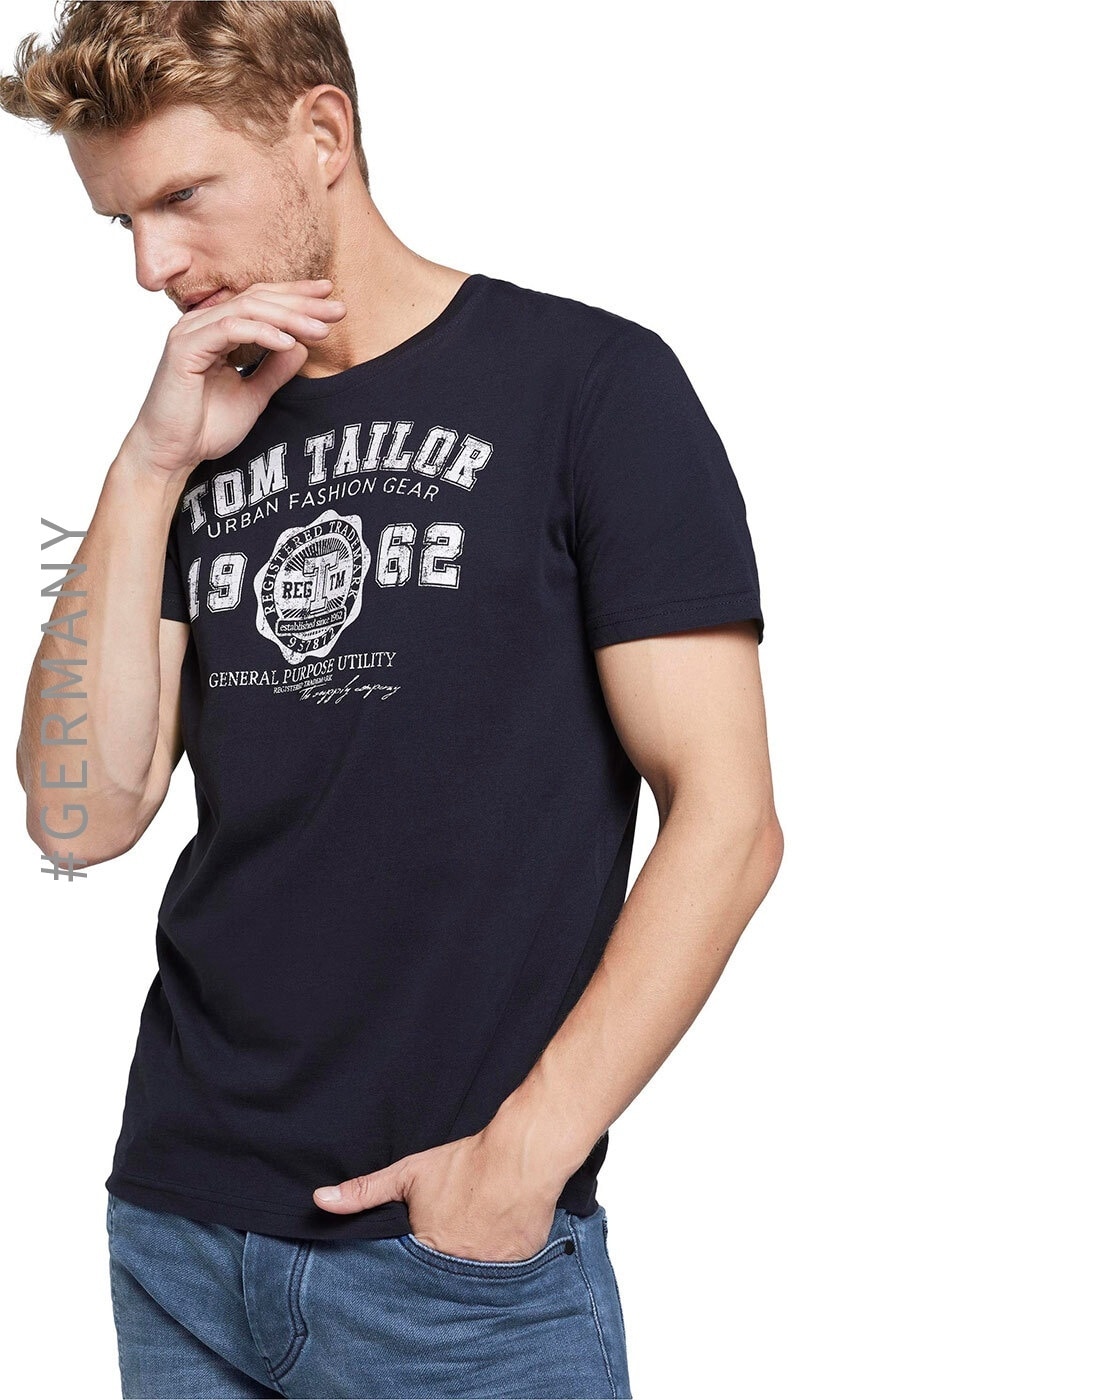 by for Buy Tailor Men Tshirts Blue Tom Navy Online